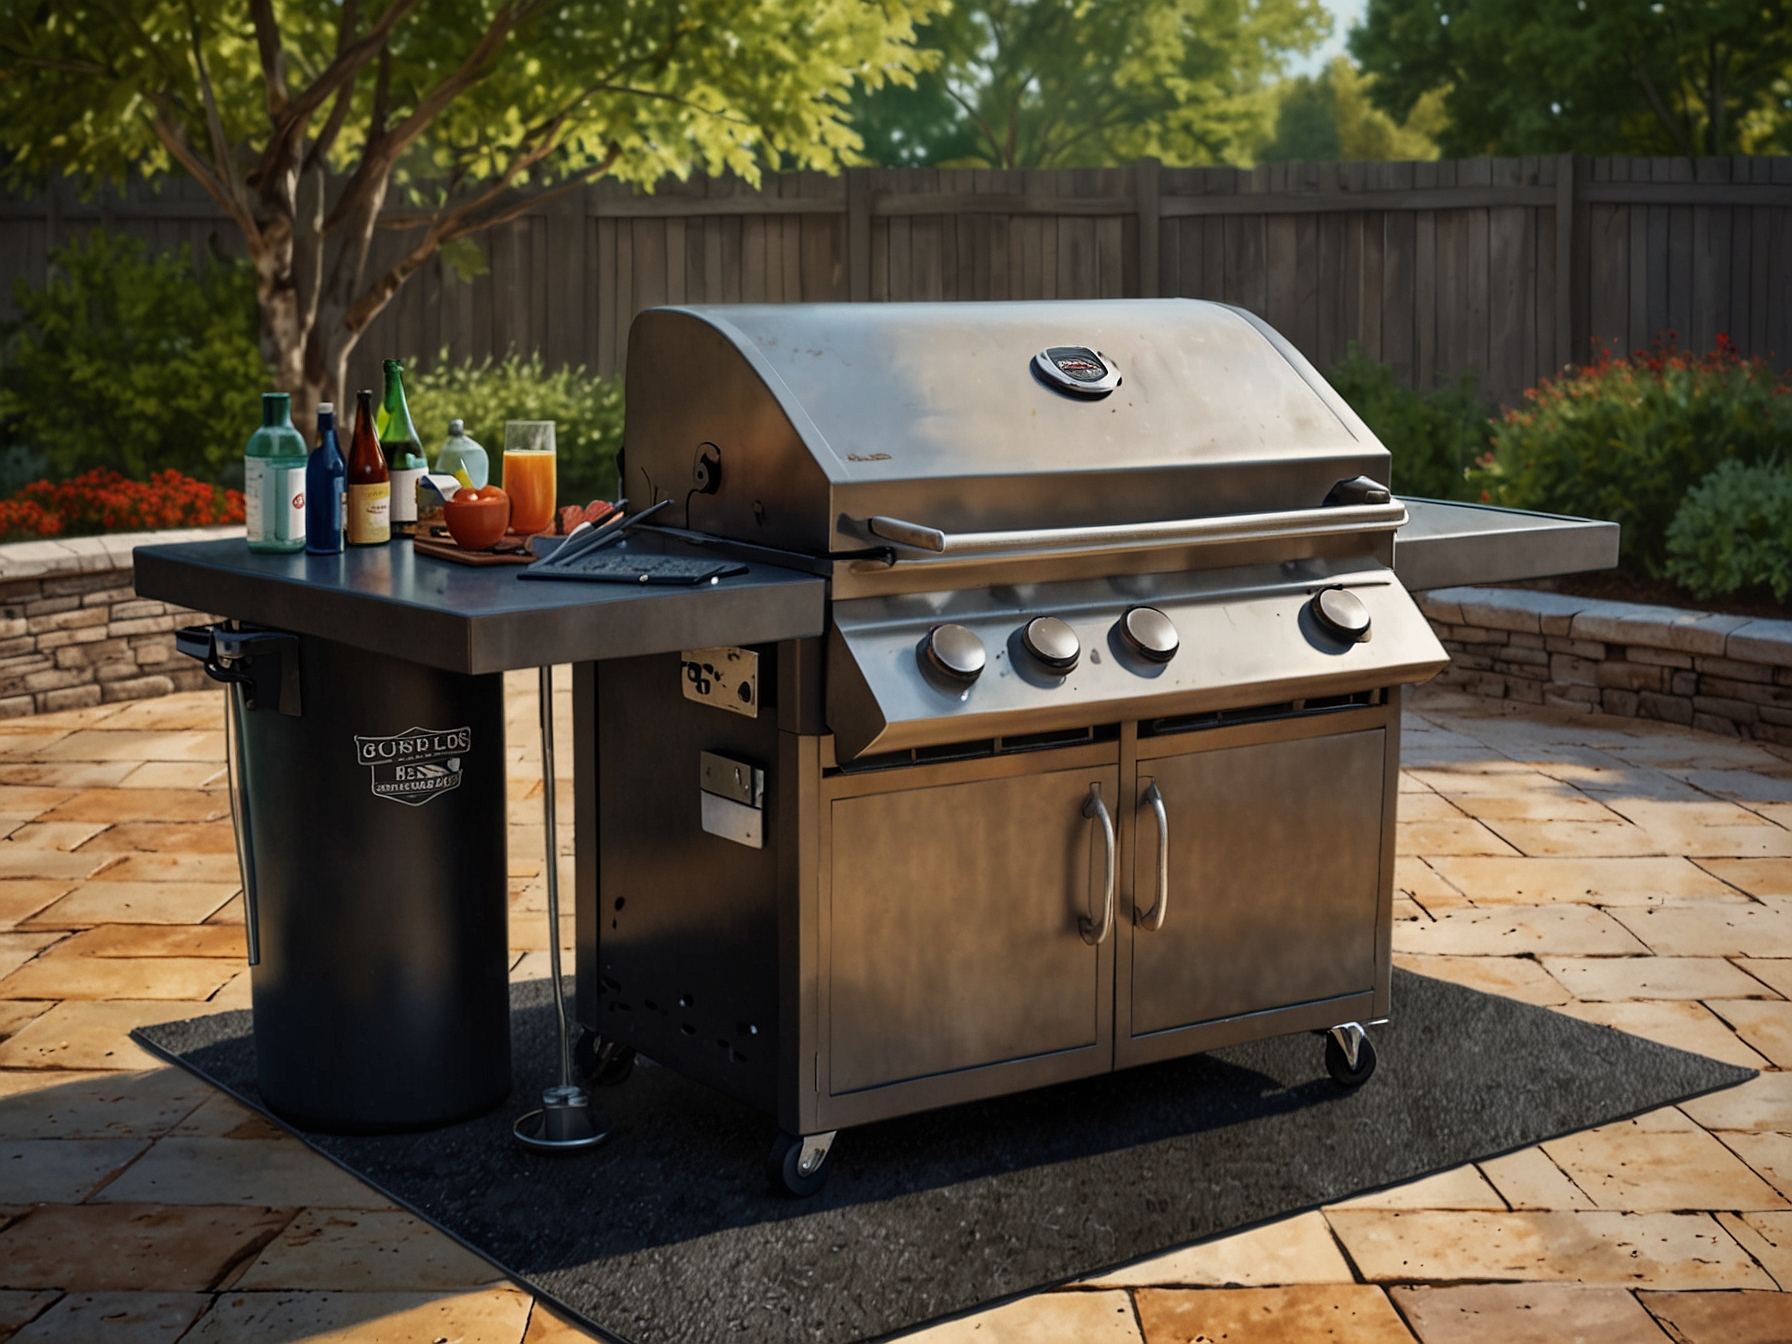 A closer look at a barbecue setup with a protective mat under the grill, showing immediate cleaning practices to avoid stains, and highlighting the use of patio sealers to preserve paver integrity.